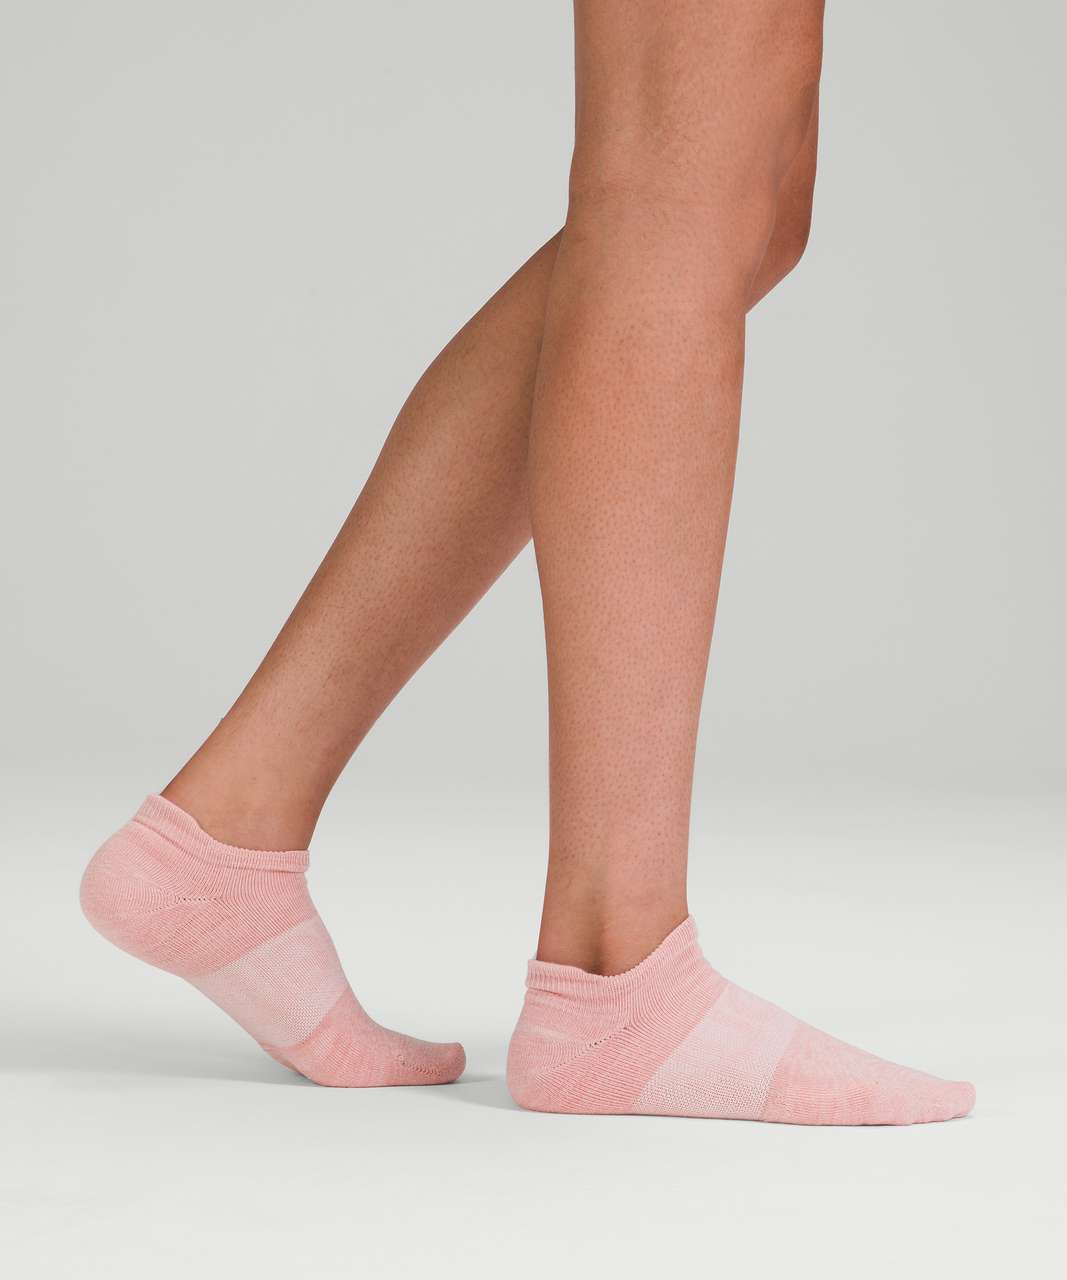 Lululemon Daily Stride Low Ankle Sock *3 Pack - Pink Puff / White / Dusky Lavender